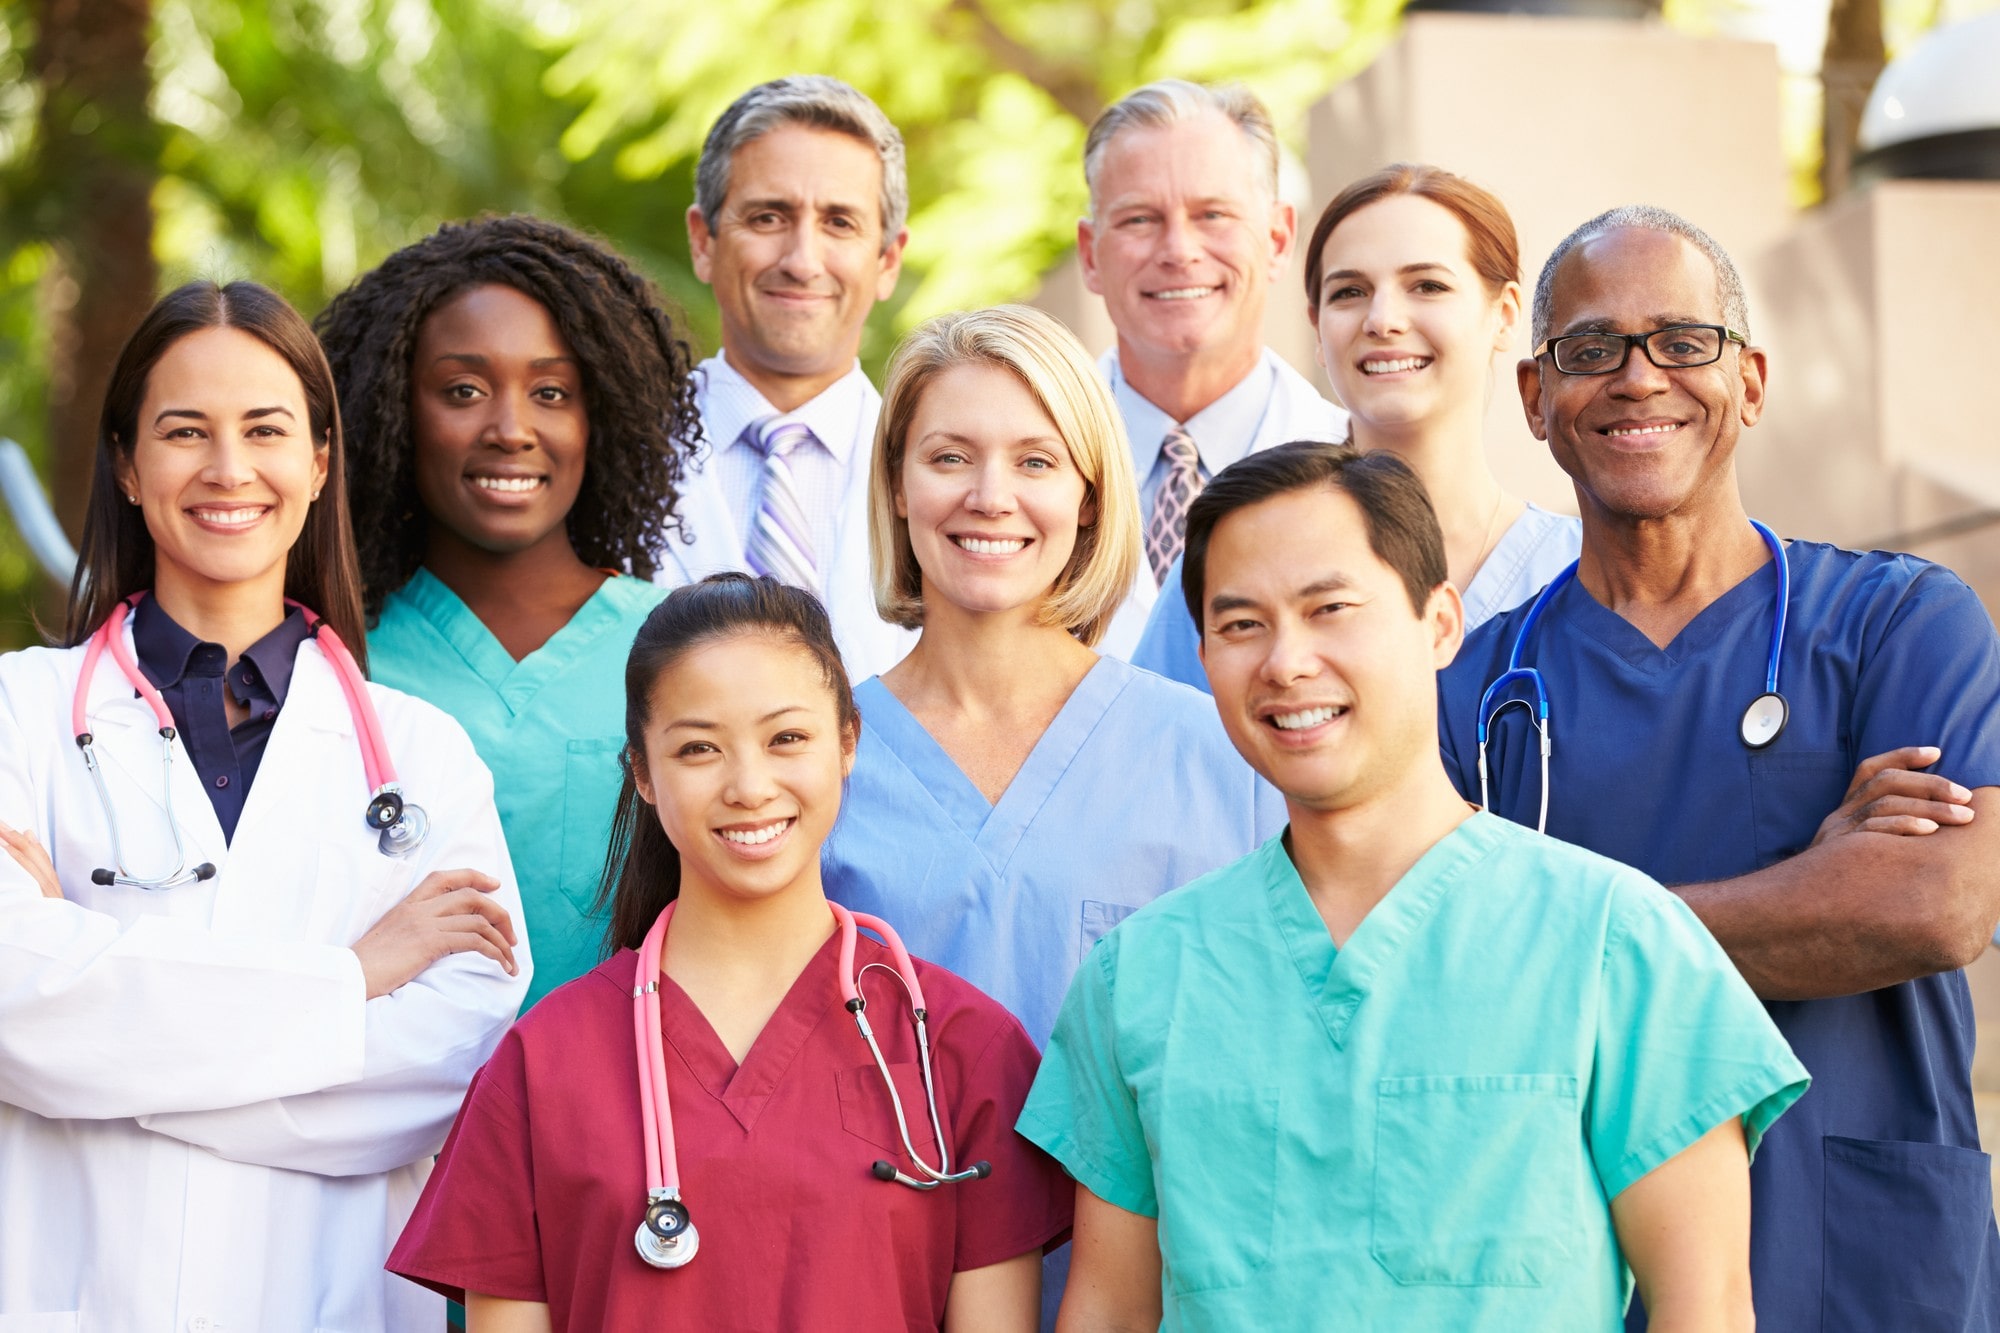 A Group of Professional Health Care Workers of Different Fields